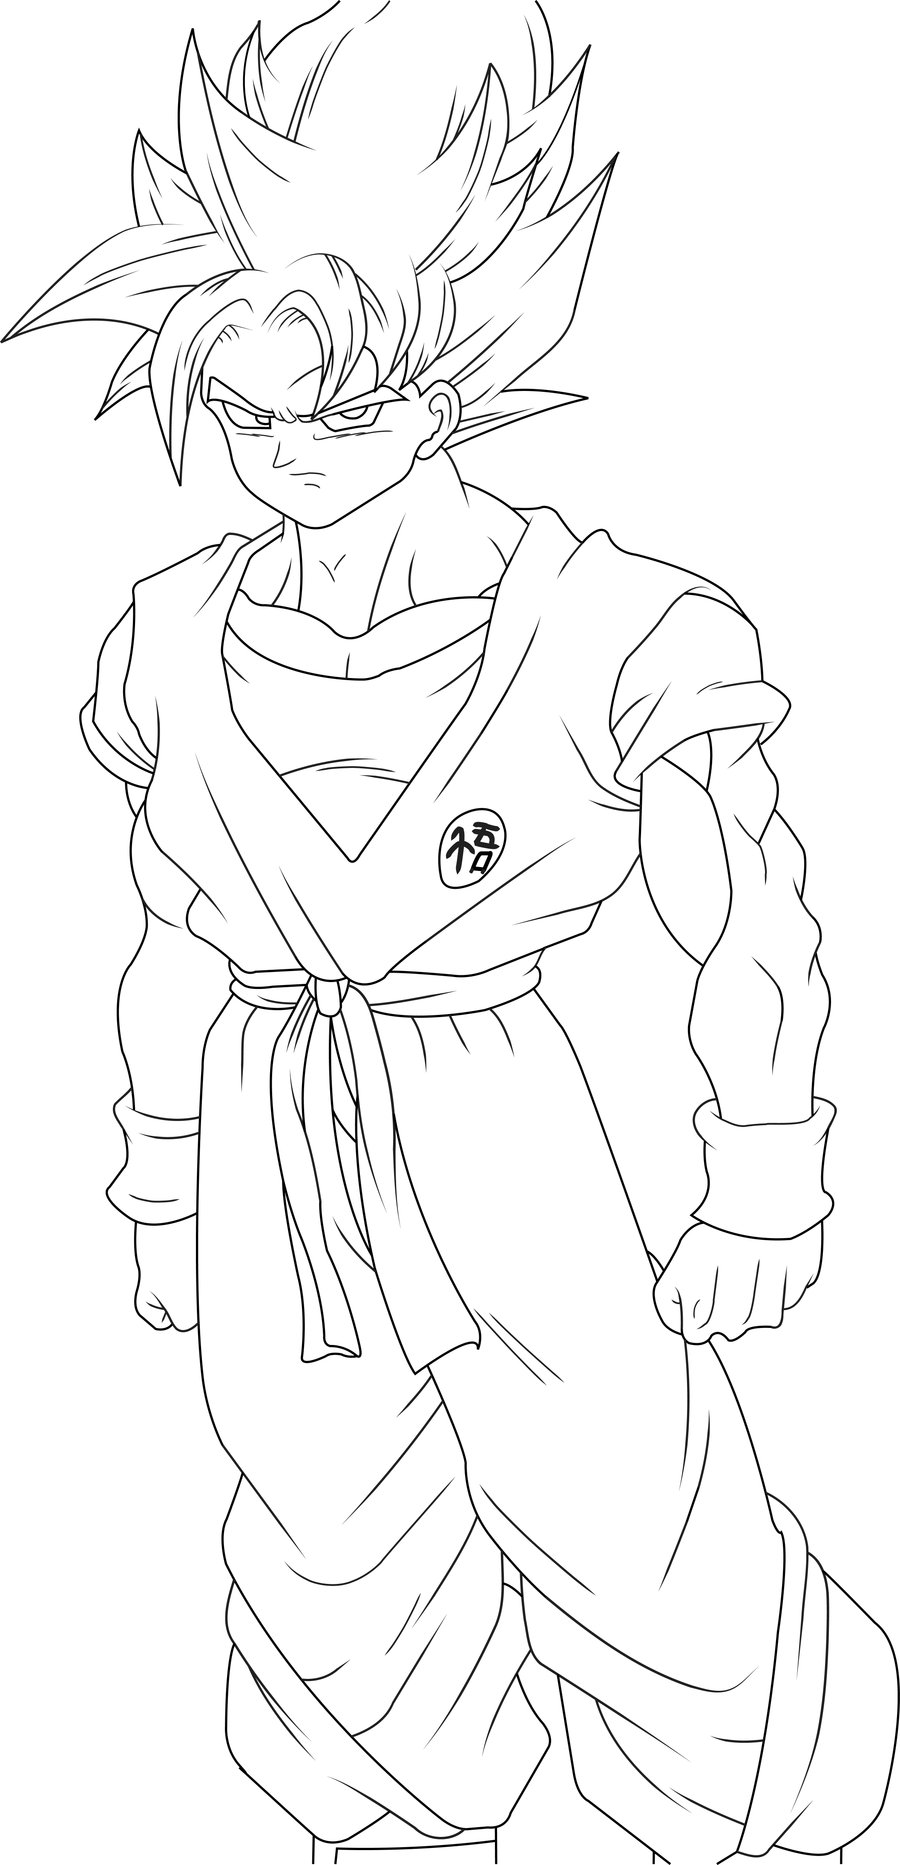 Goku coloring pages to download and print for free